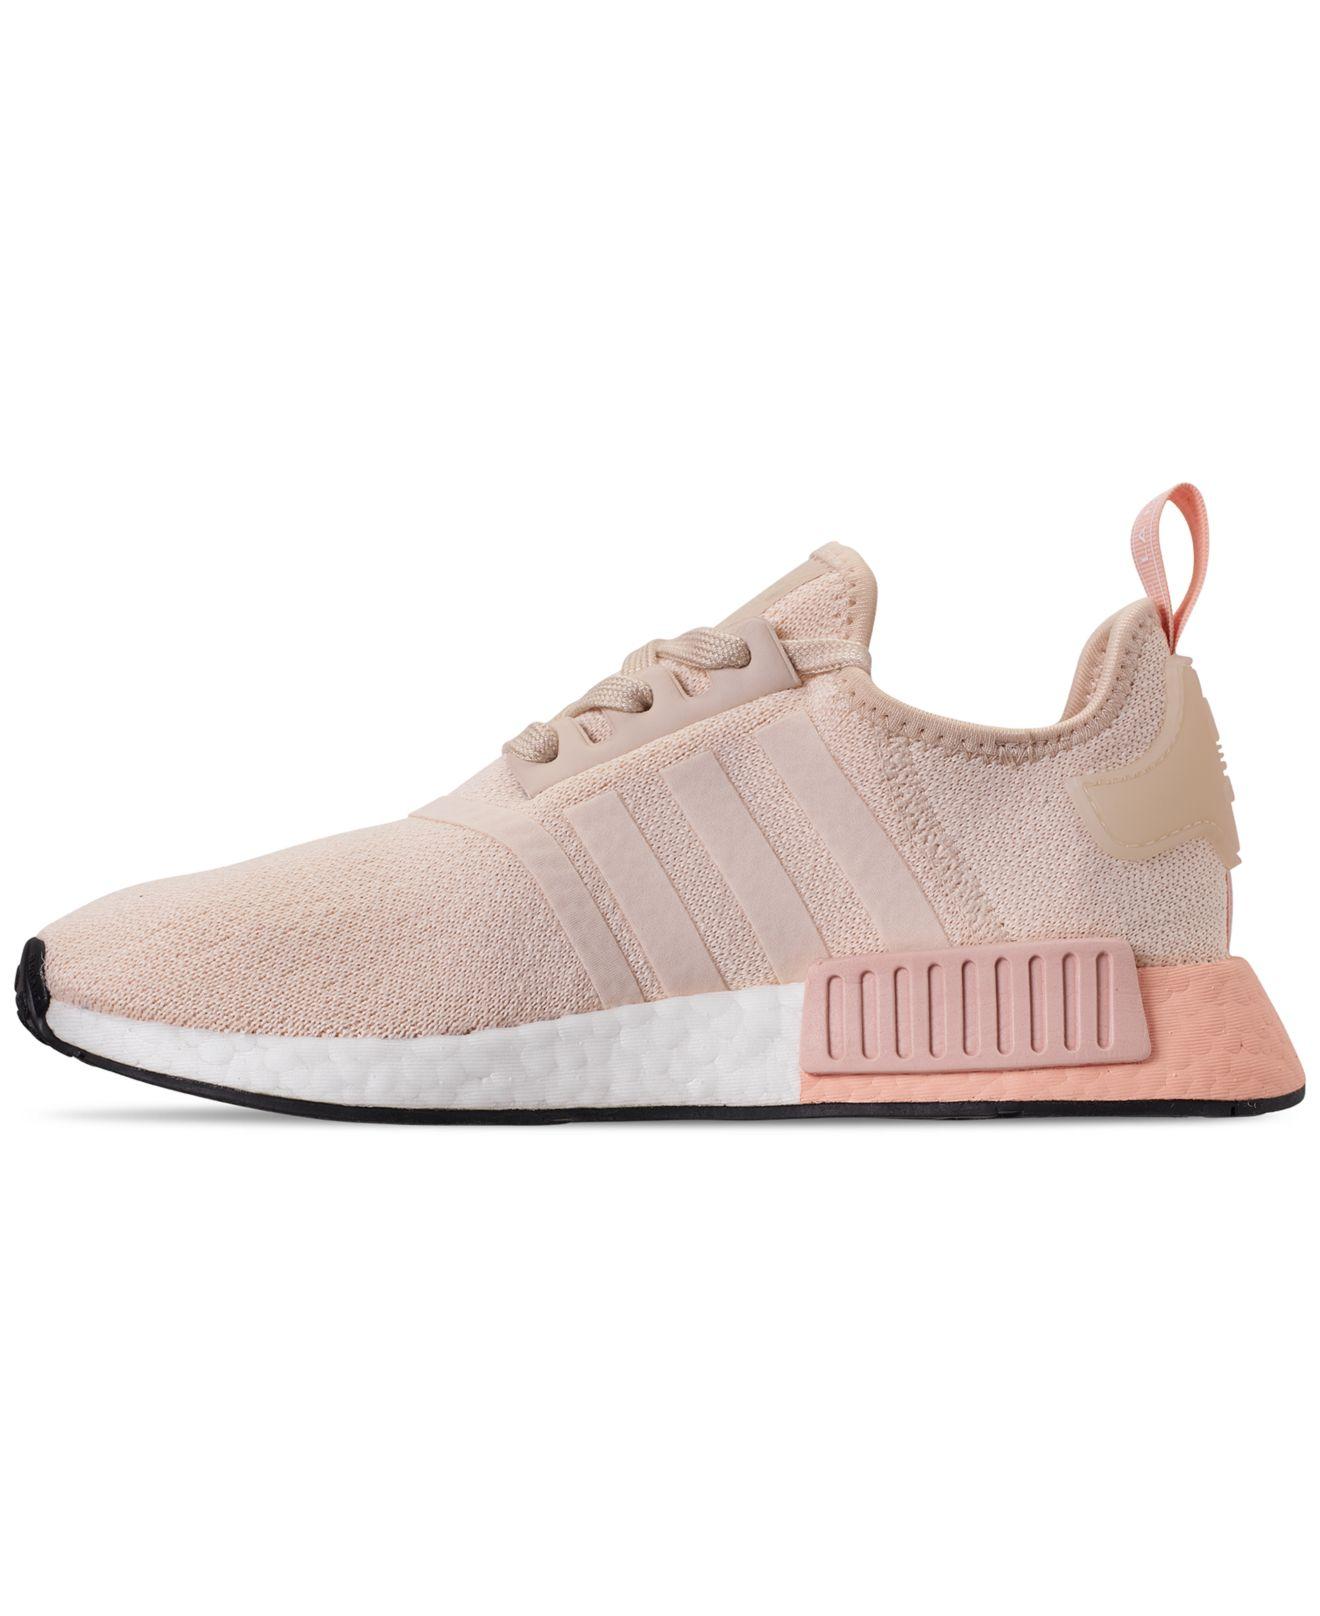 adidas Nmd Casual Sneakers Finish Line in Pink | Lyst